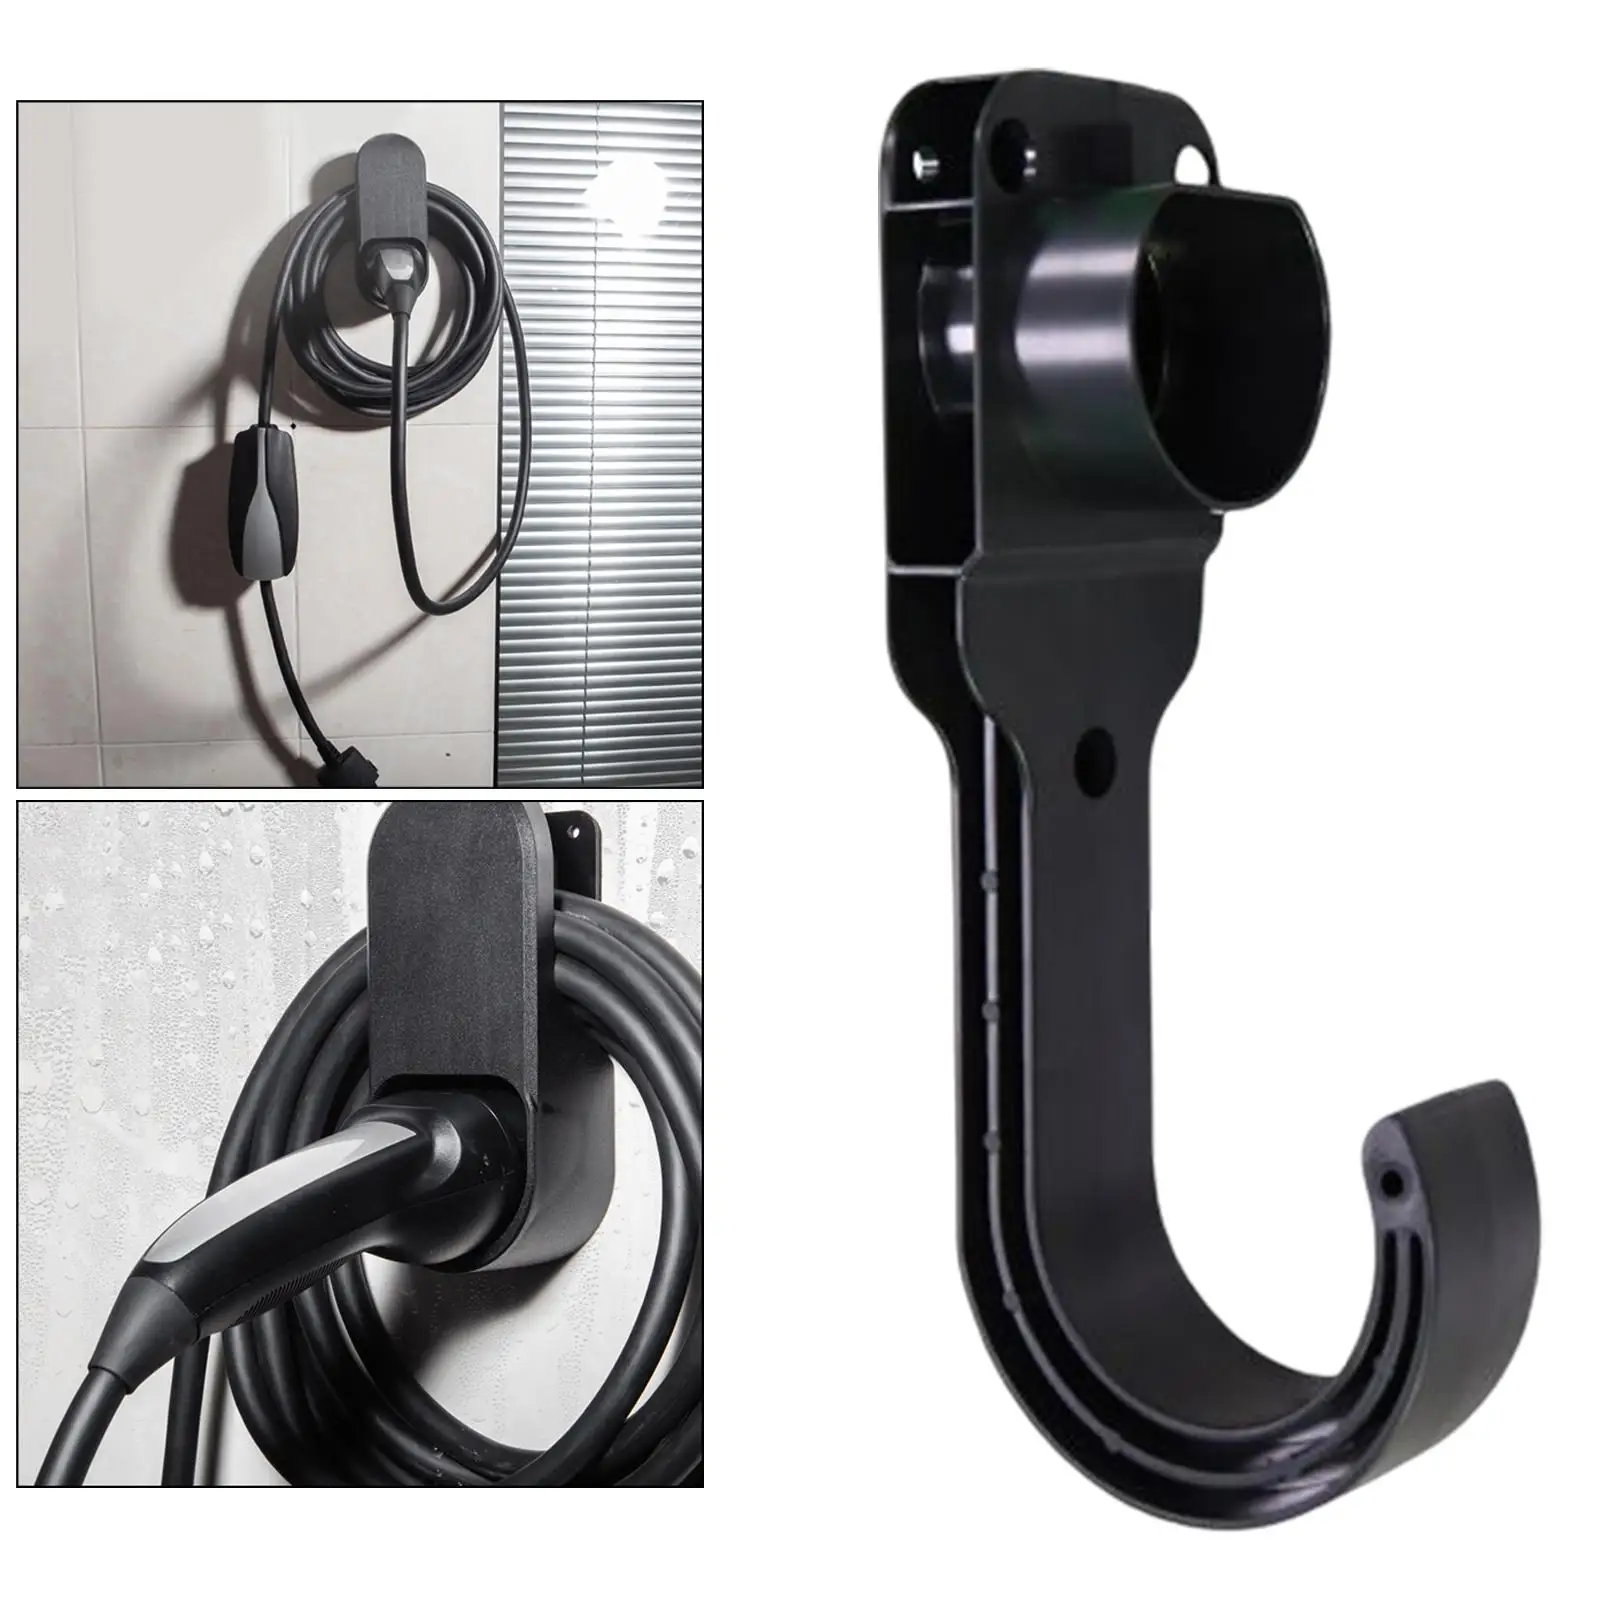 Holder Car Charging Cable Accessory Wall Mount Bracket Electric Vehicle